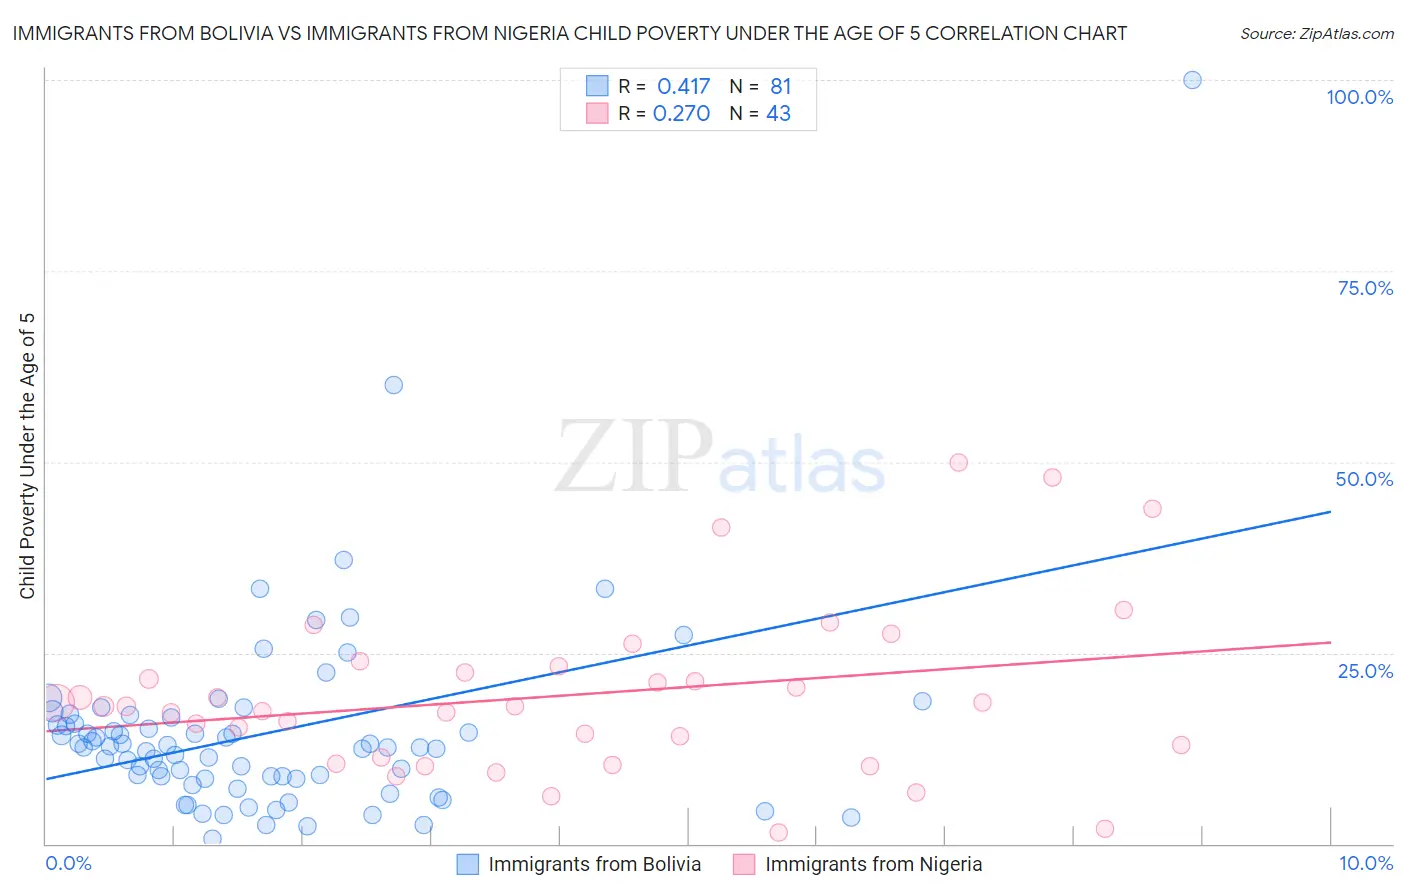 Immigrants from Bolivia vs Immigrants from Nigeria Child Poverty Under the Age of 5